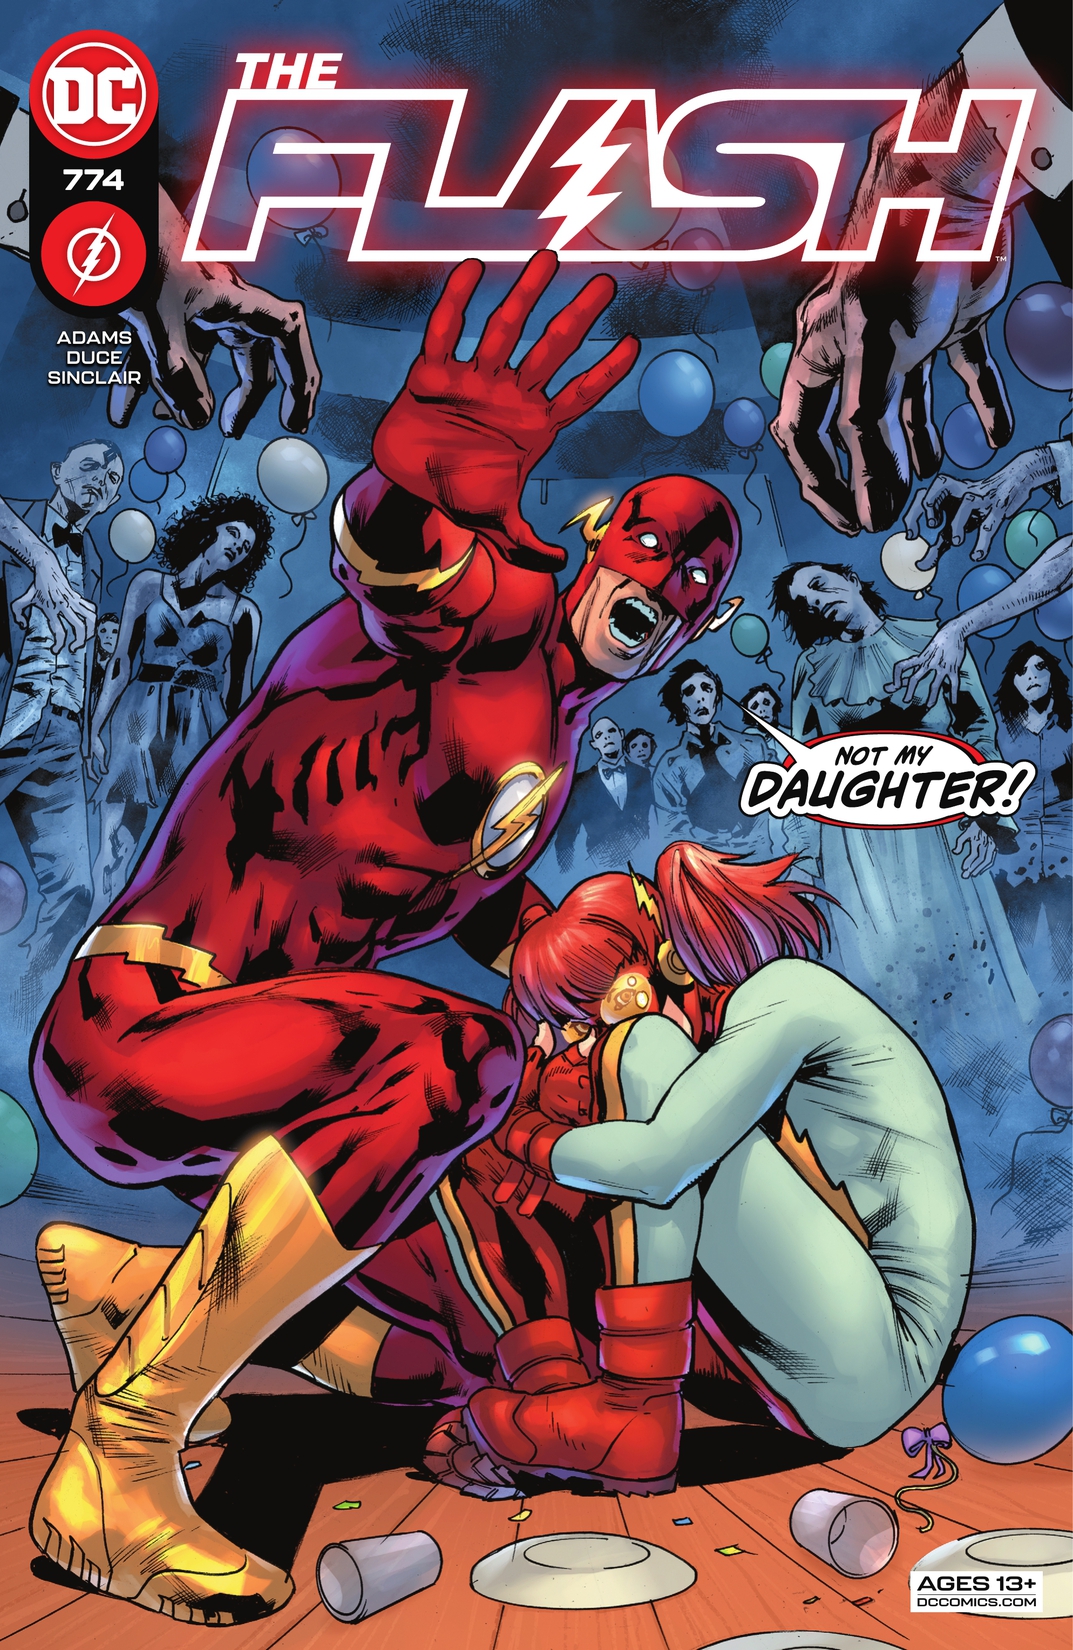 The Flash (2016-) #774 preview images